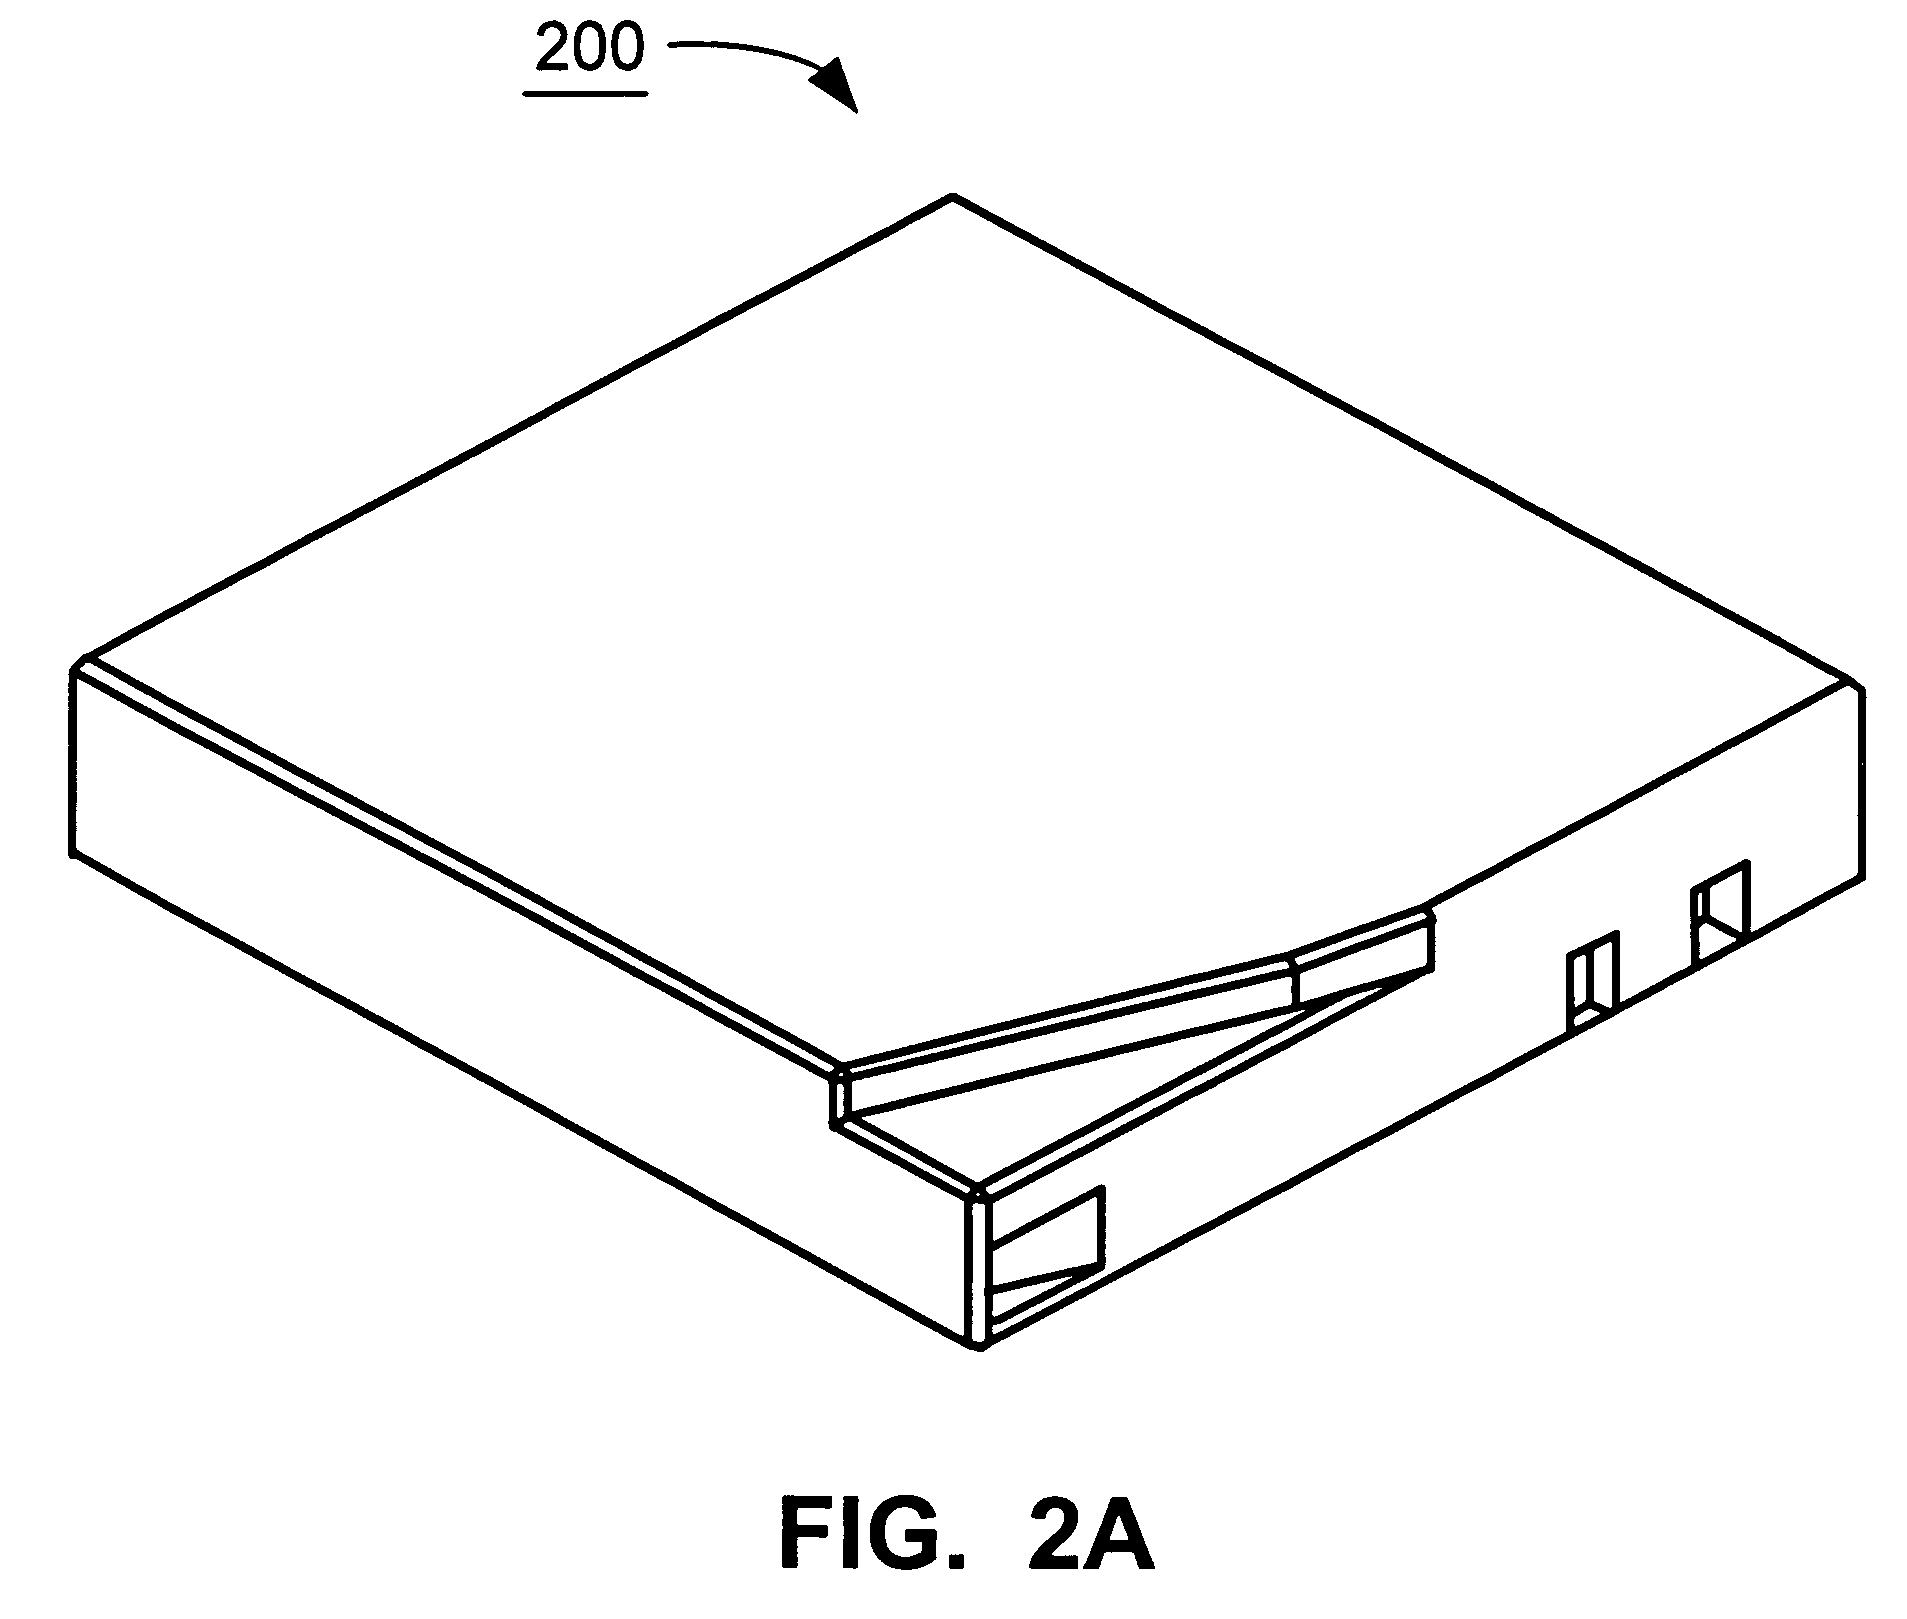 Method and apparatus for adsorbing molecules from an atmosphere inside an enclosure containing multiple data storage devices